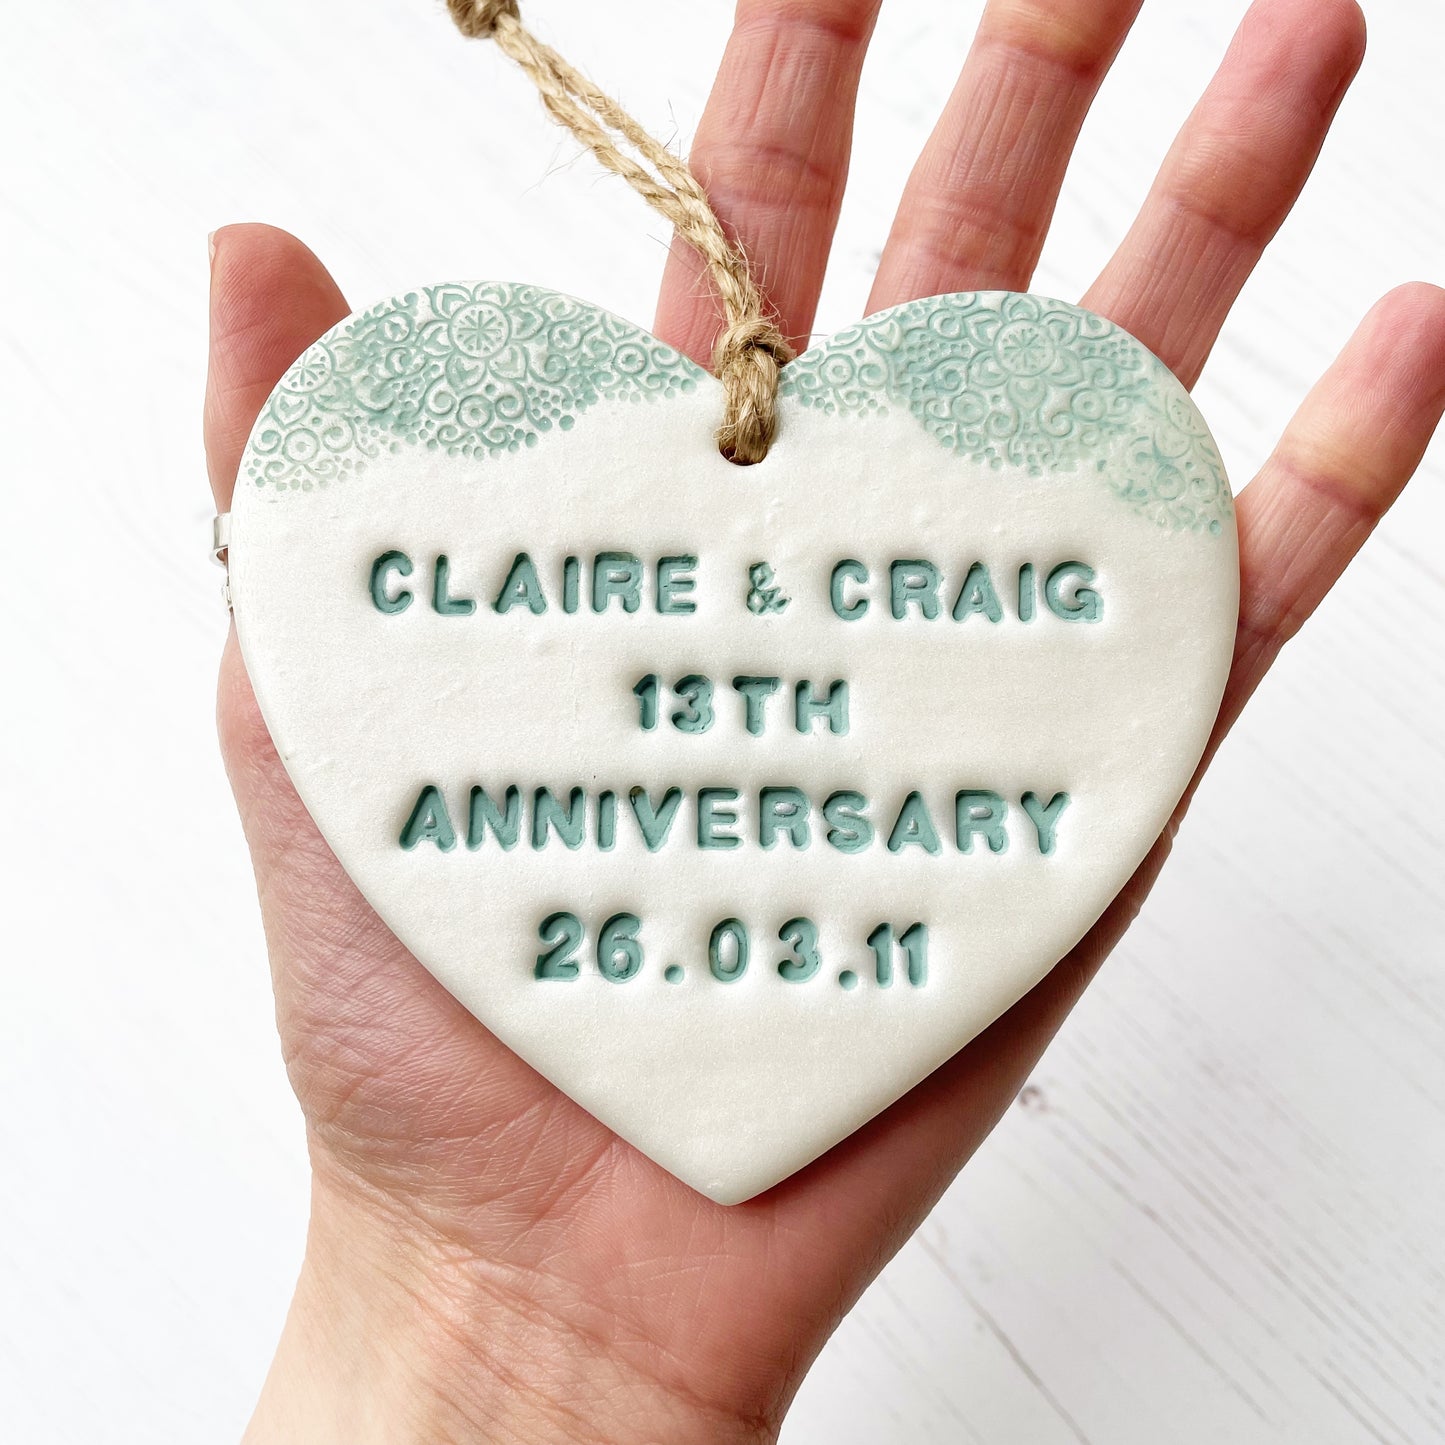 Personalised 13th wedding anniversary gift, pearlised white clay hanging heart with a sage green lace edge at the top of the heart, the heart is personalised with CLAIRE & CRAIG 13TH ANNIVERSARY 26.03.11